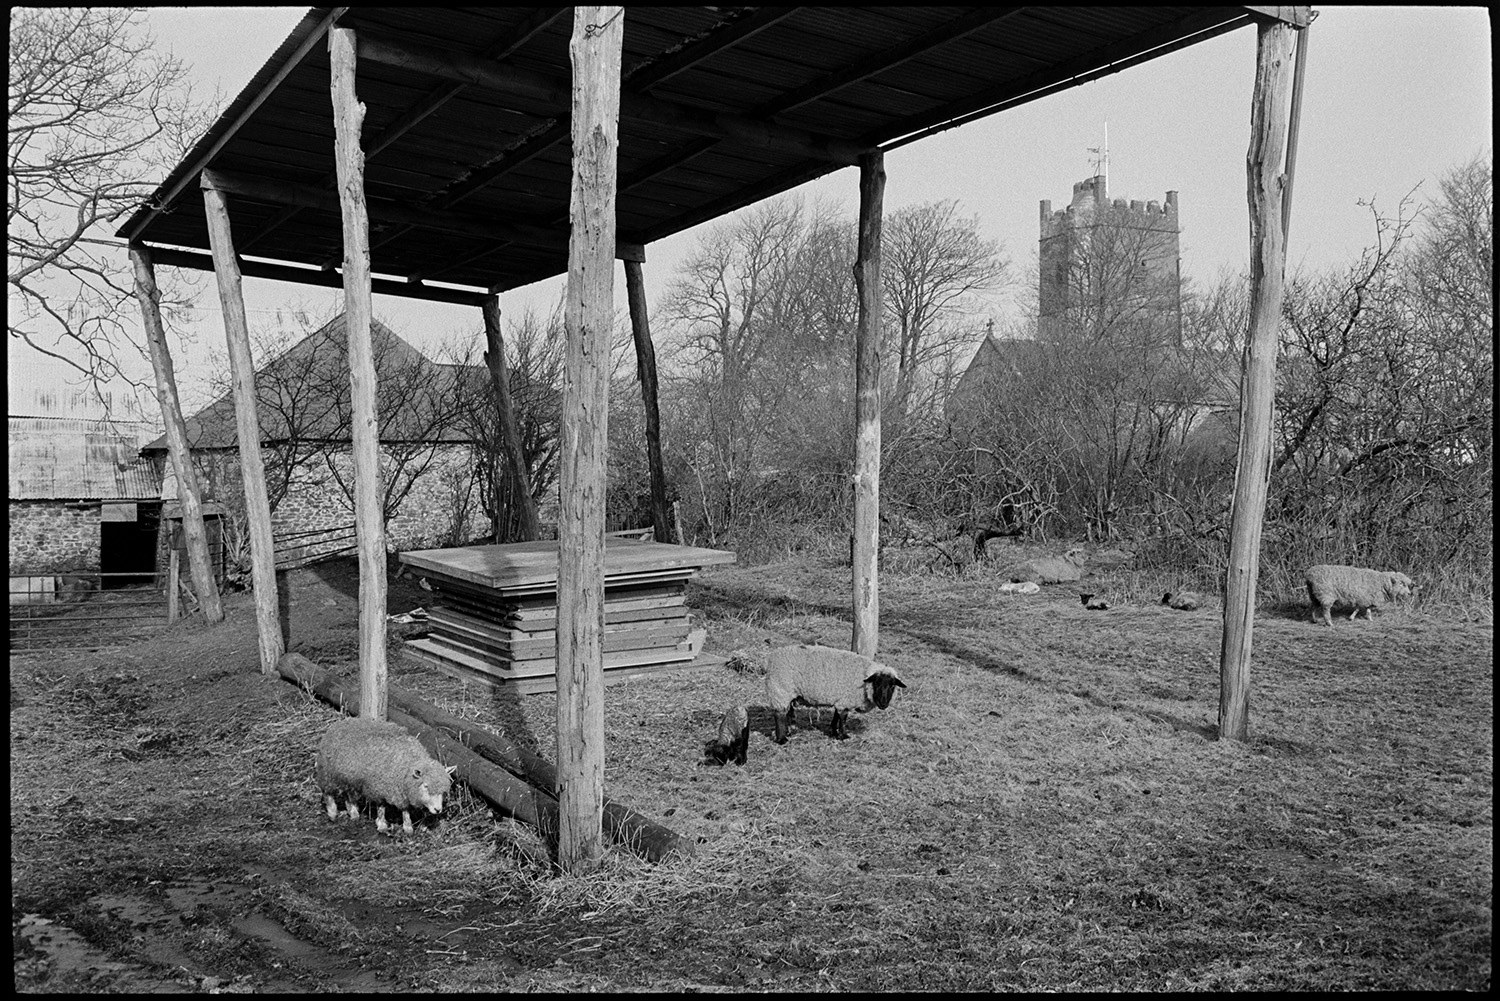 Barns, empty, with lambs and ewes, tractor, feeding in field.
[An open barn supported by wooden posts, with a corrugated iron roof, in a field at The Barton, Burrington. Sheet of timber are in the barn and ewes and lambs are grazing in the field. Trees, a church tower and farm buildings are in the background.]